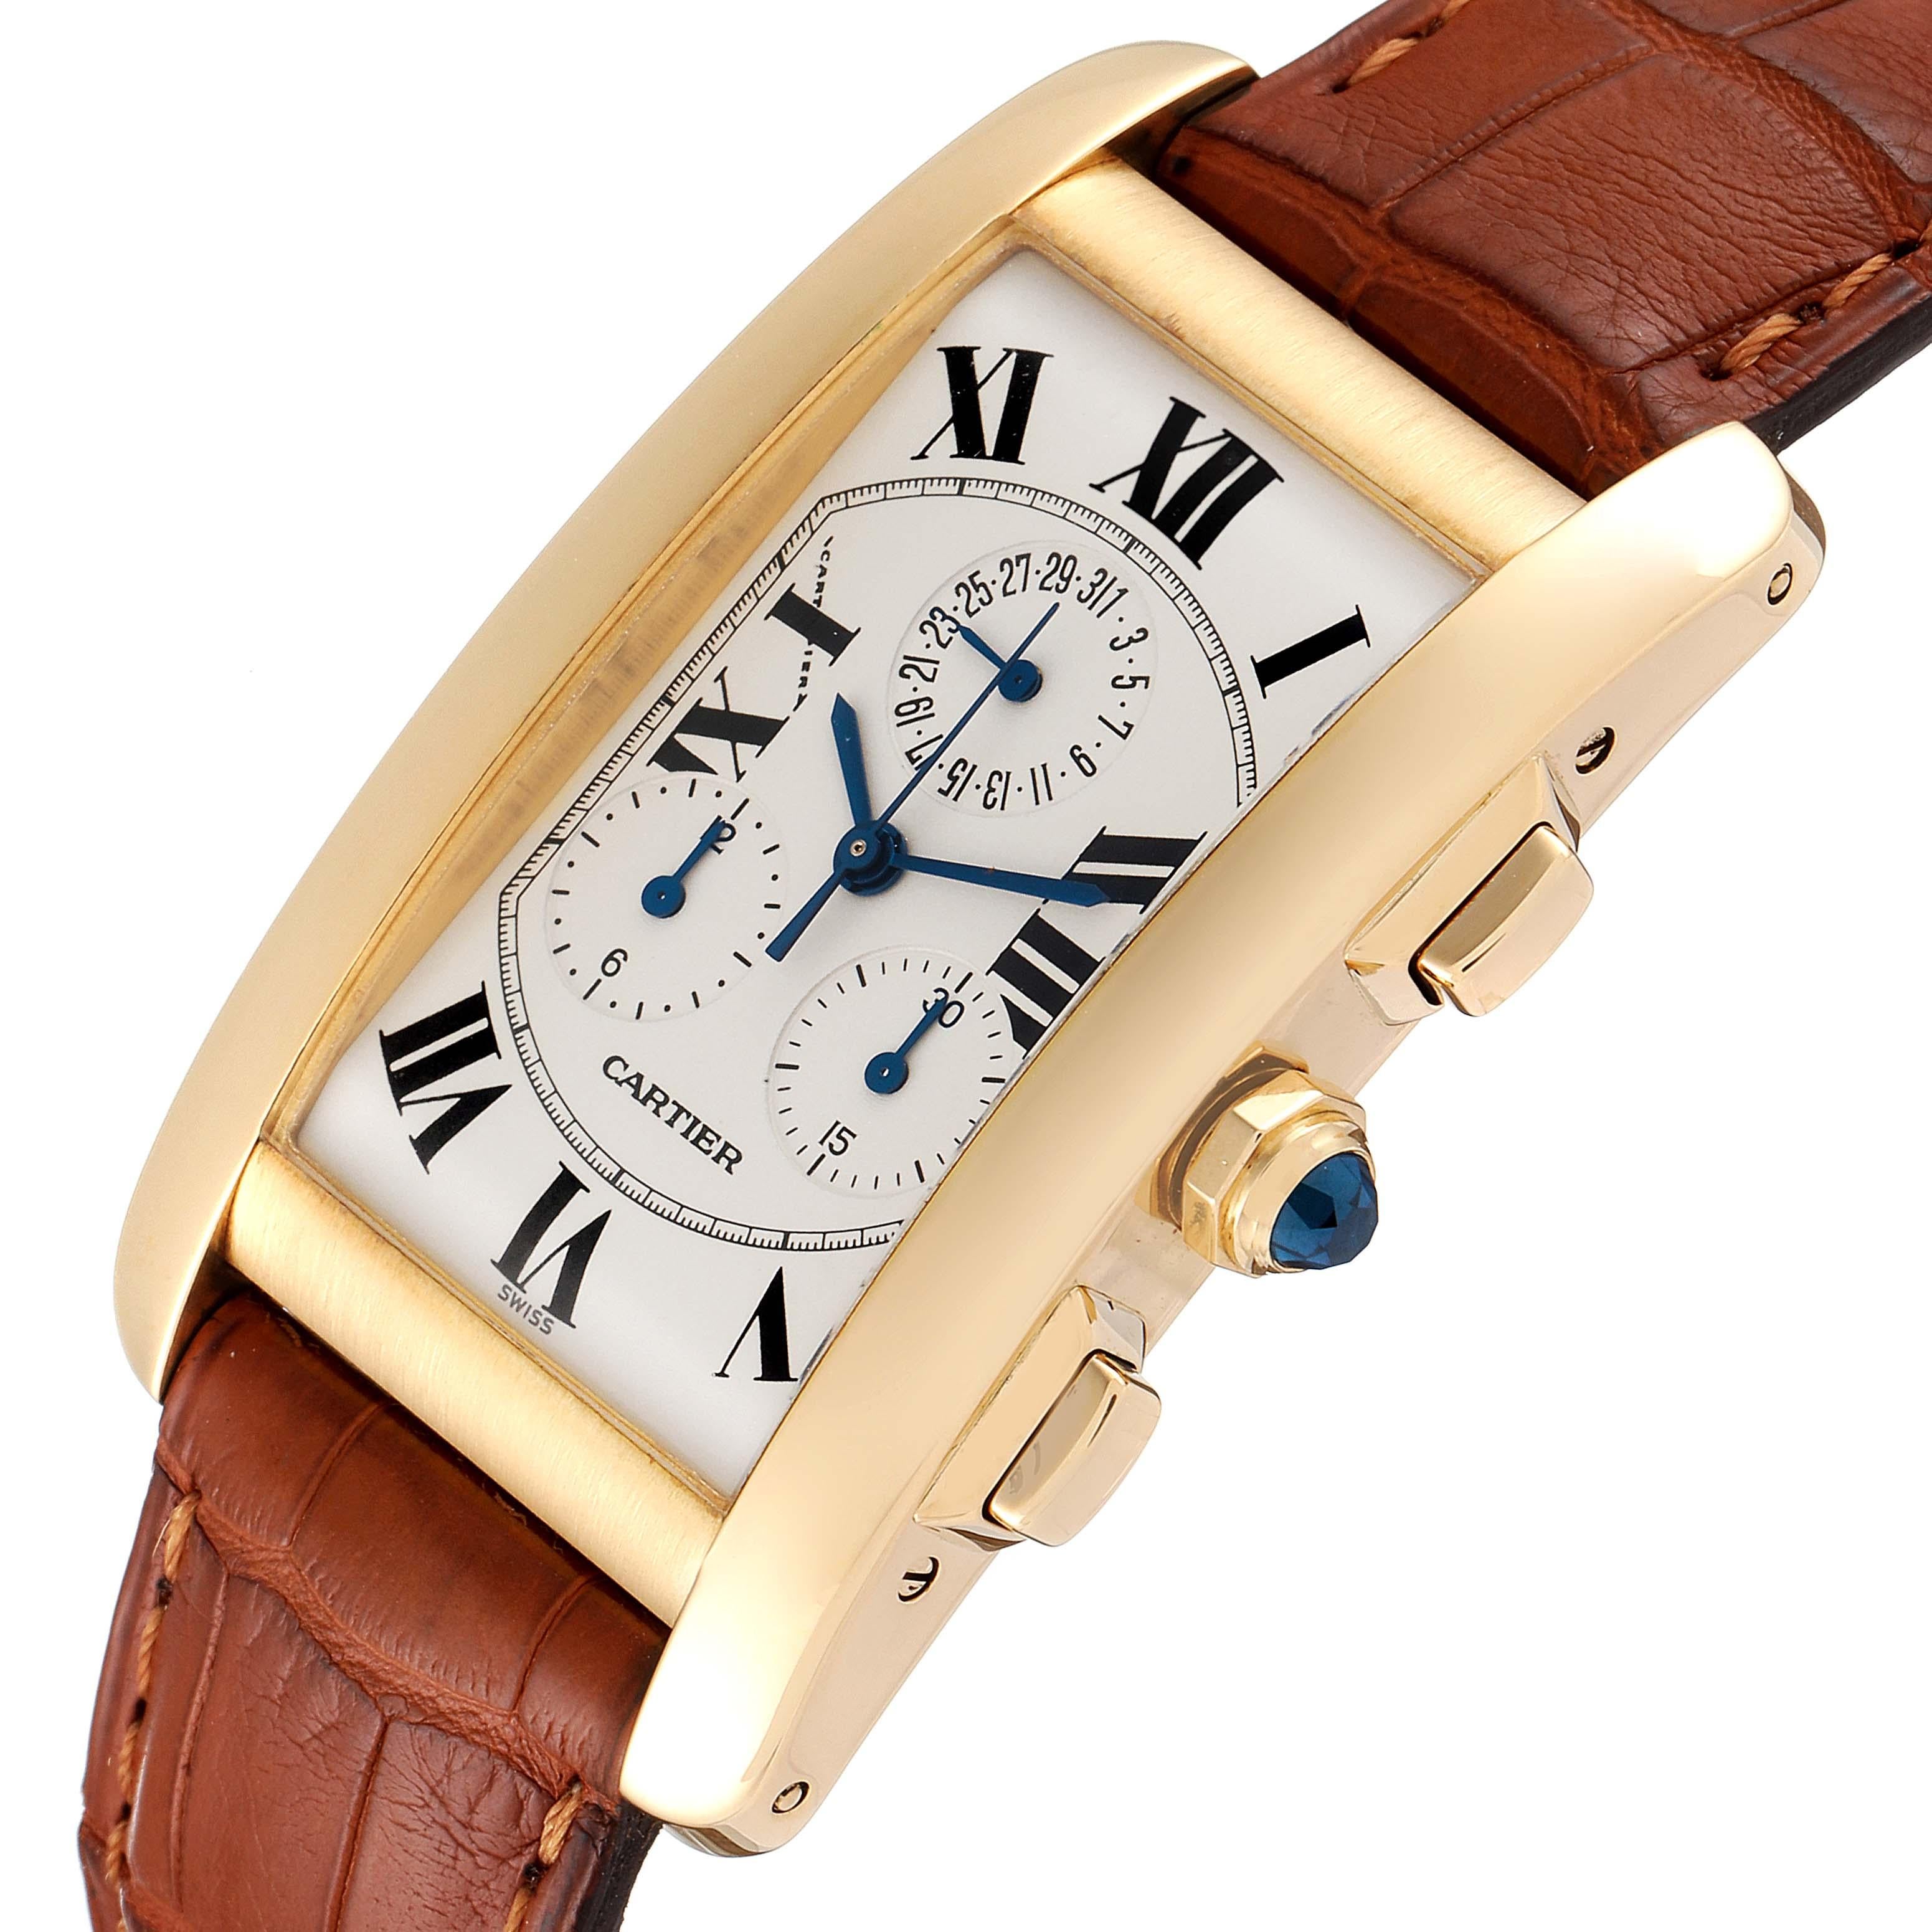 Cartier Tank Americaine Chronograph Yellow Gold Mens Watch W2601156 For Sale 1